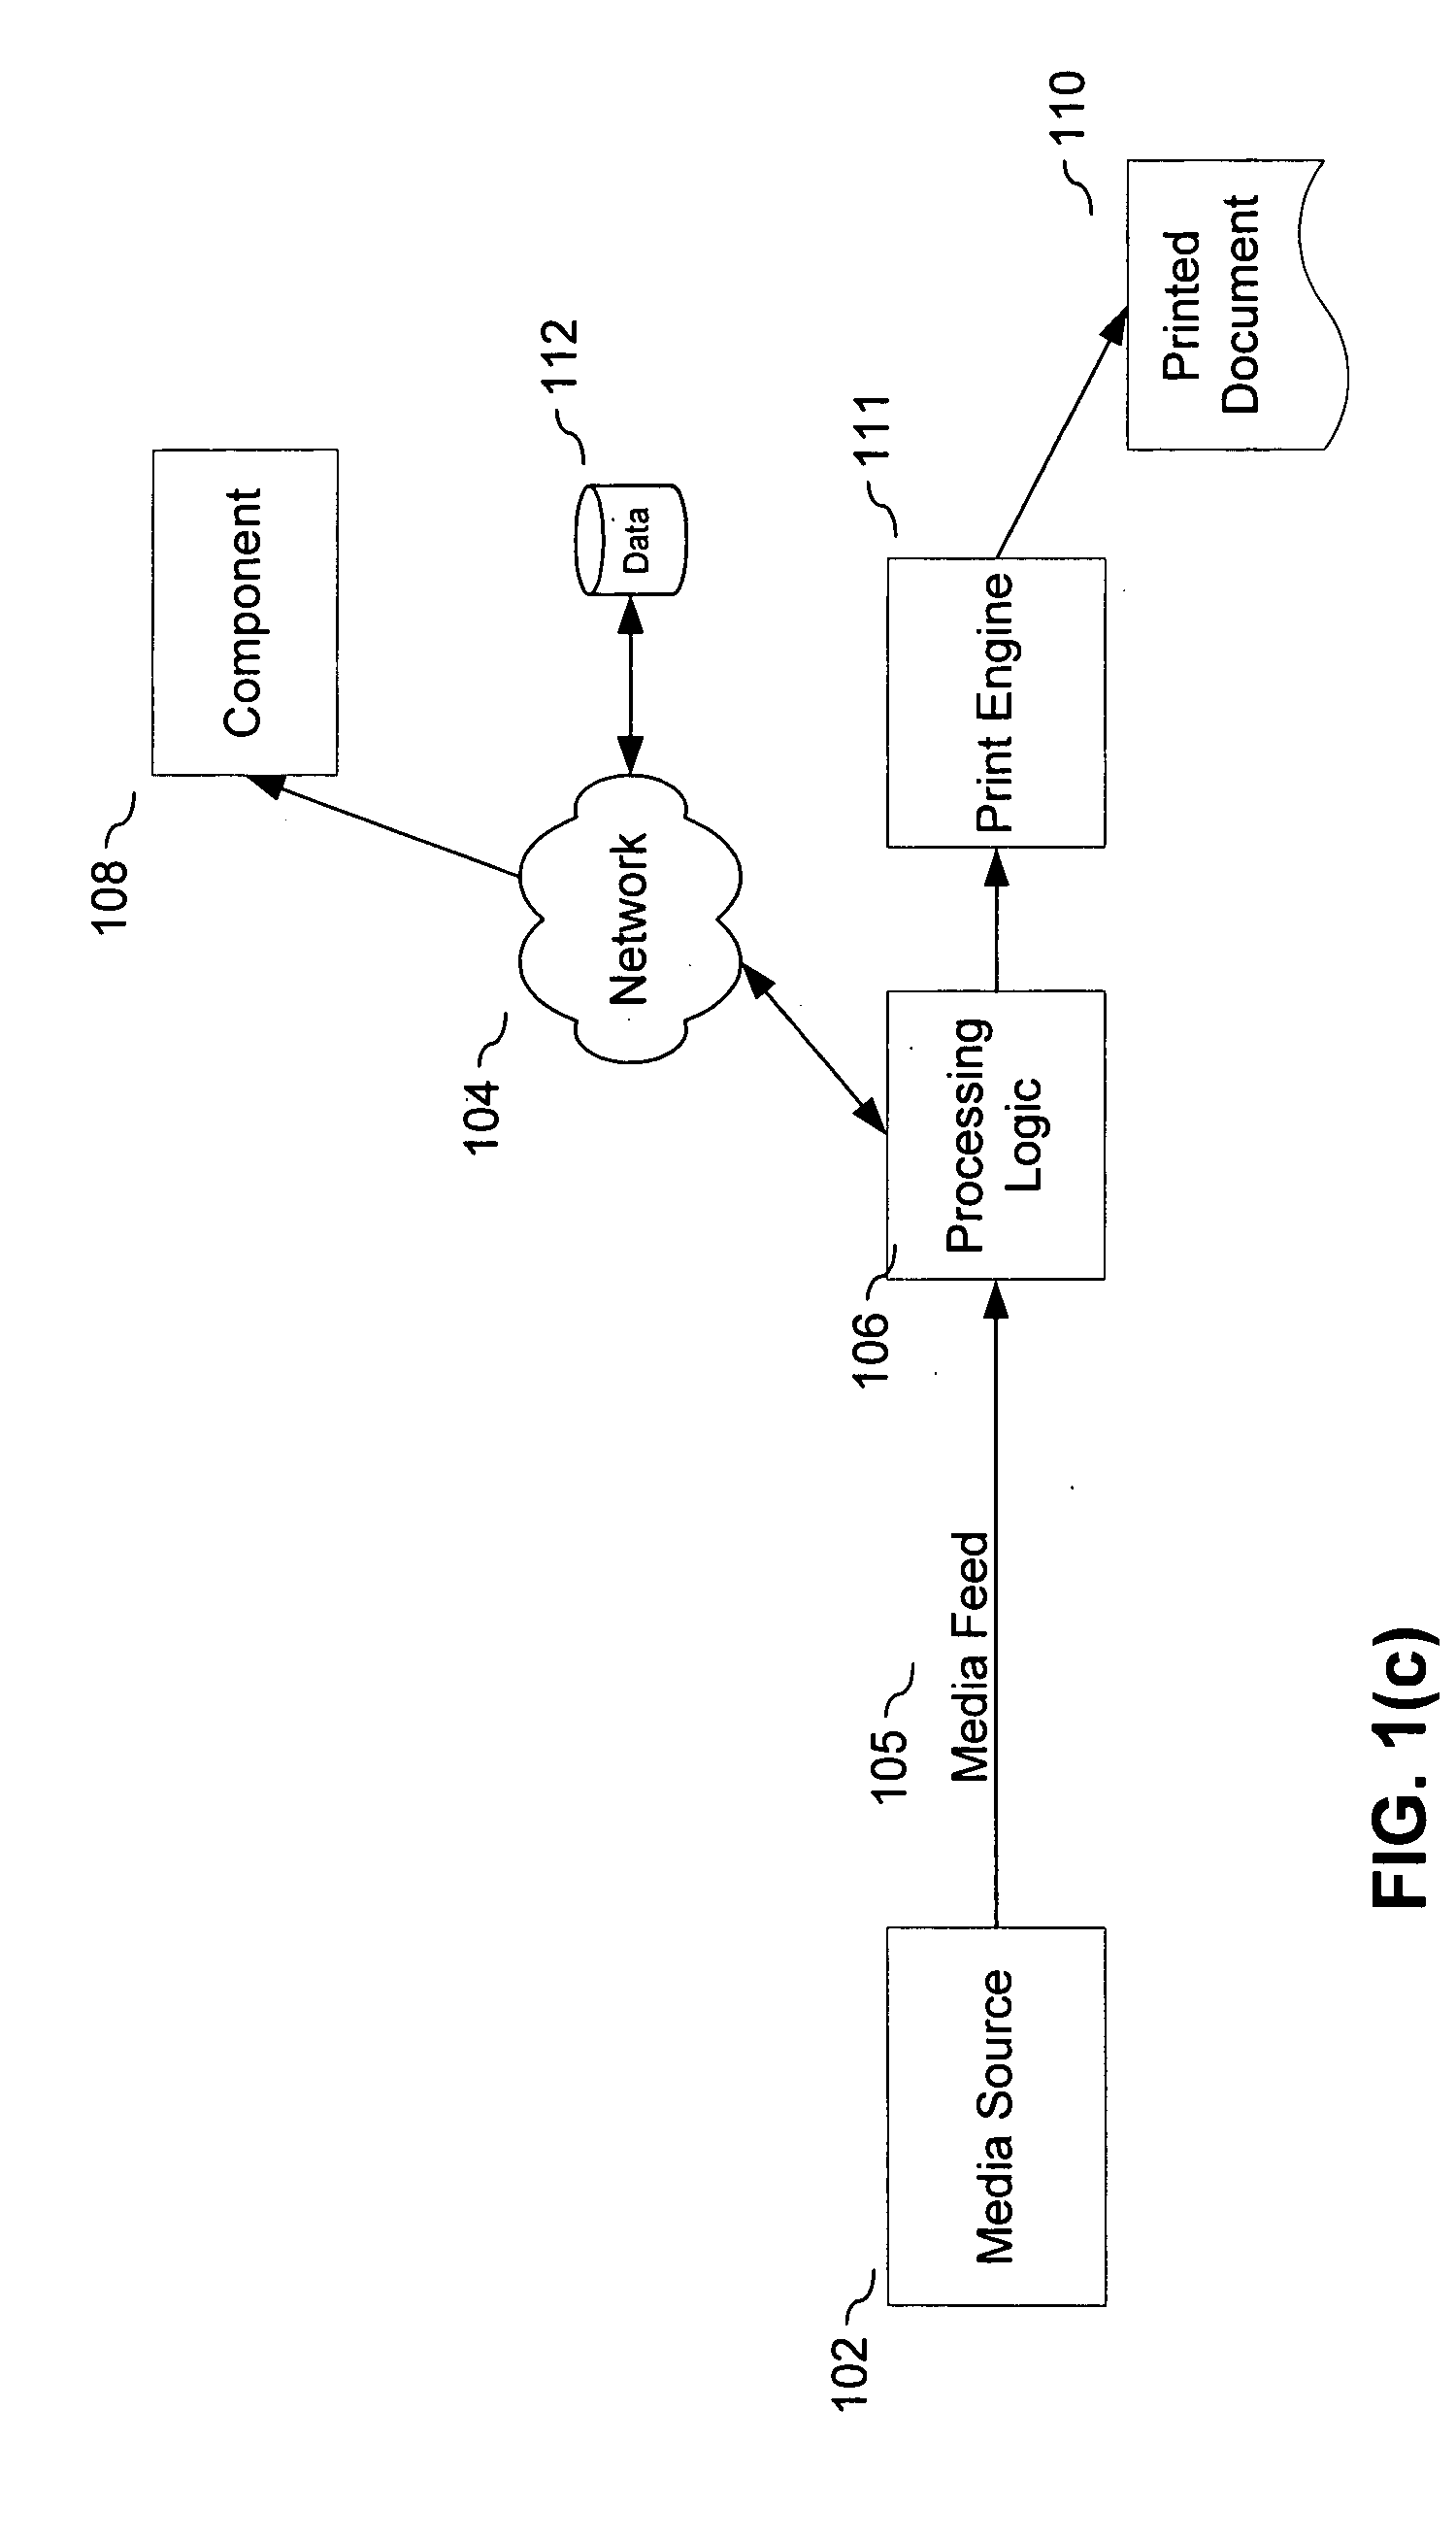 Printer with audio or video receiver, recorder, and real-time content-based processing logic